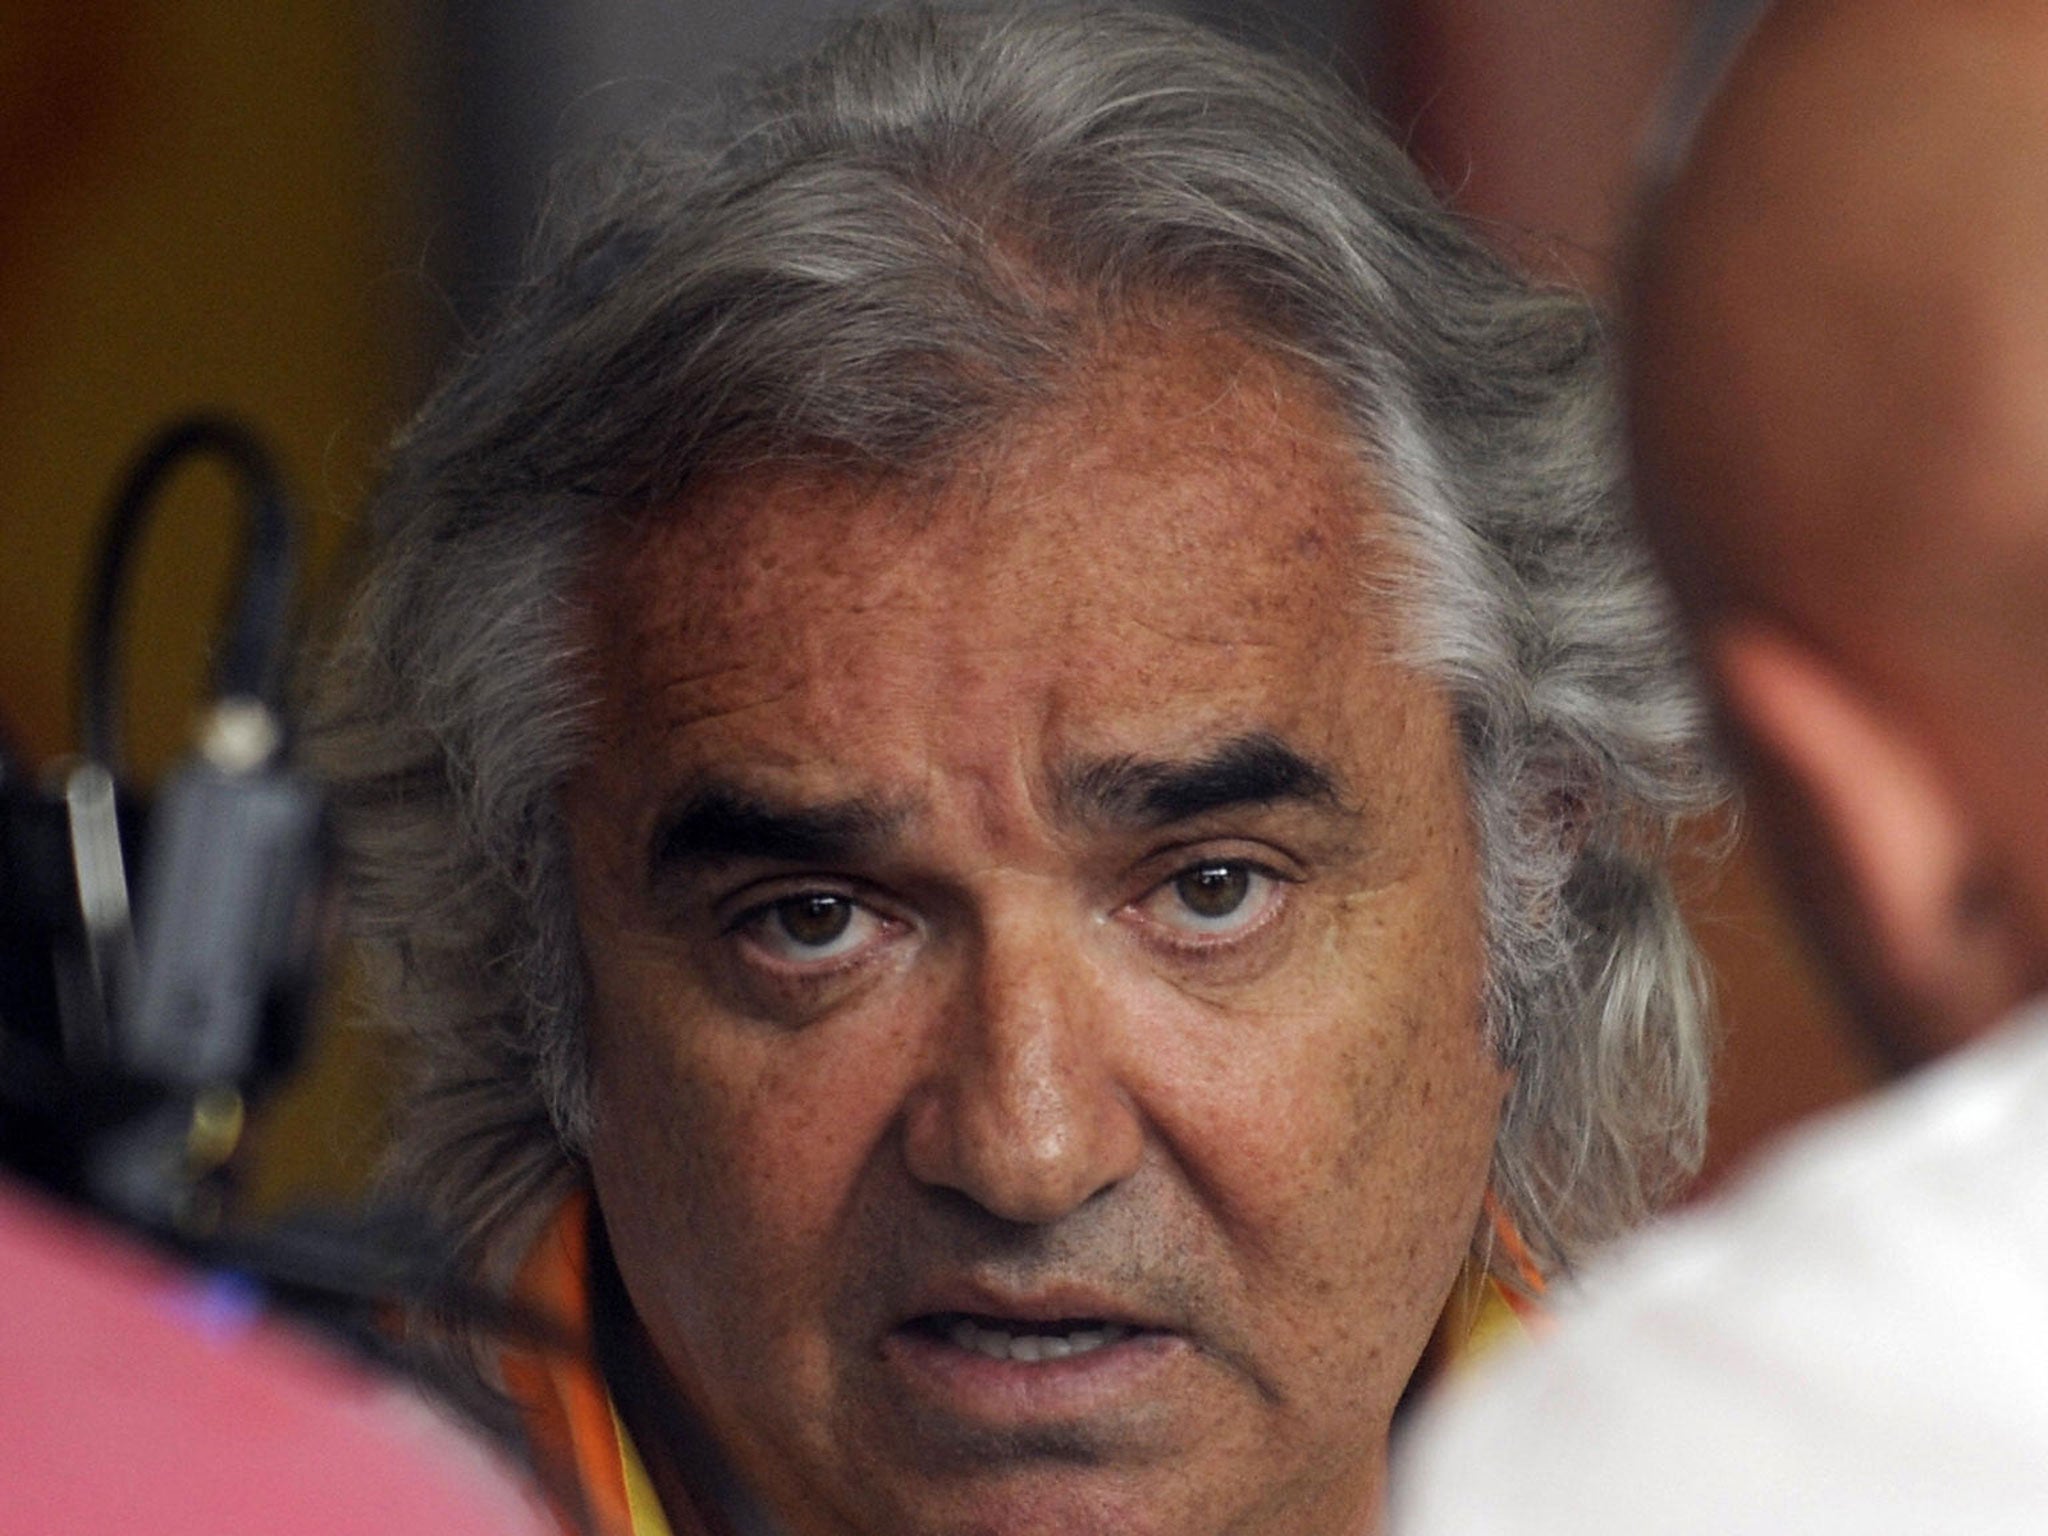 Flavio Briatore Renault F1 managing director Flavio Briatore was banned for life from the sport in 2009 for ordering his driver Nelson Piquet Jr. to crash in order to bring out the safety car which would help his teammate Fernando Alonso. The